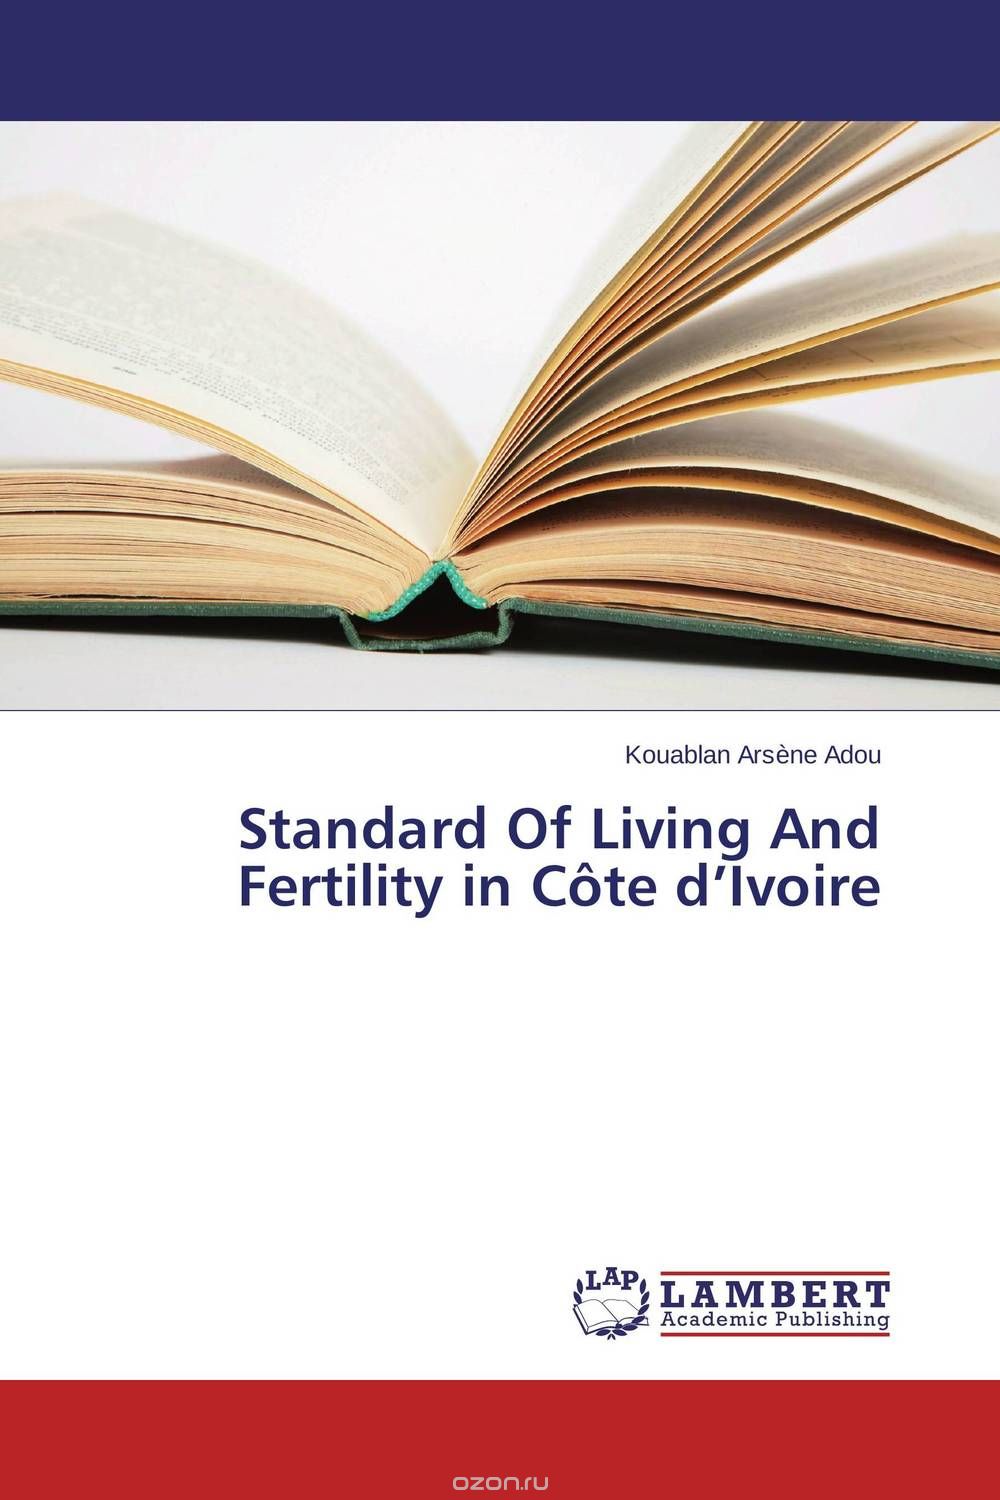 Standard Of Living And Fertility in Cote d’Ivoire